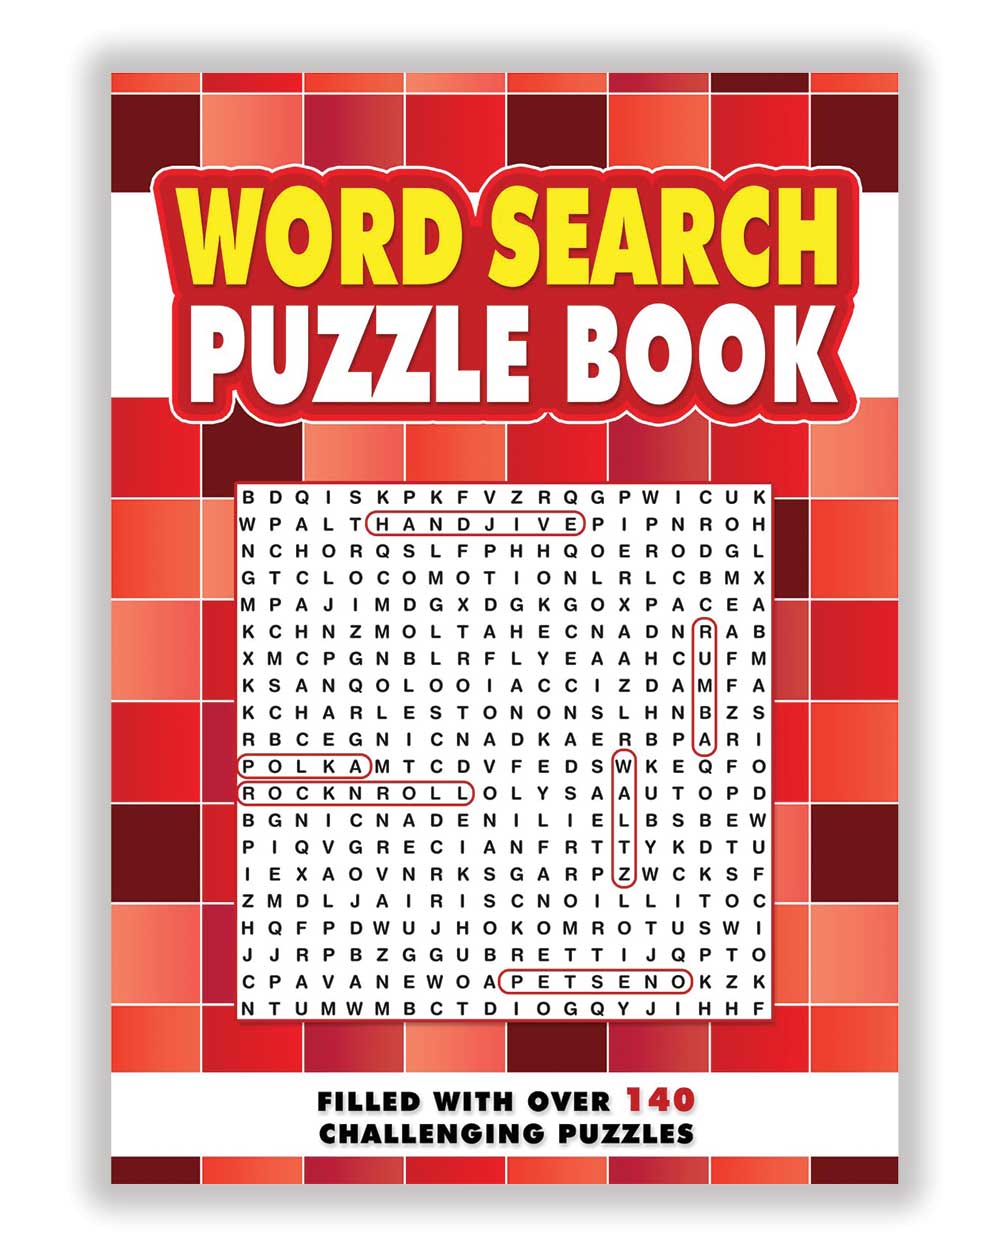 word search puzzle book red cover image